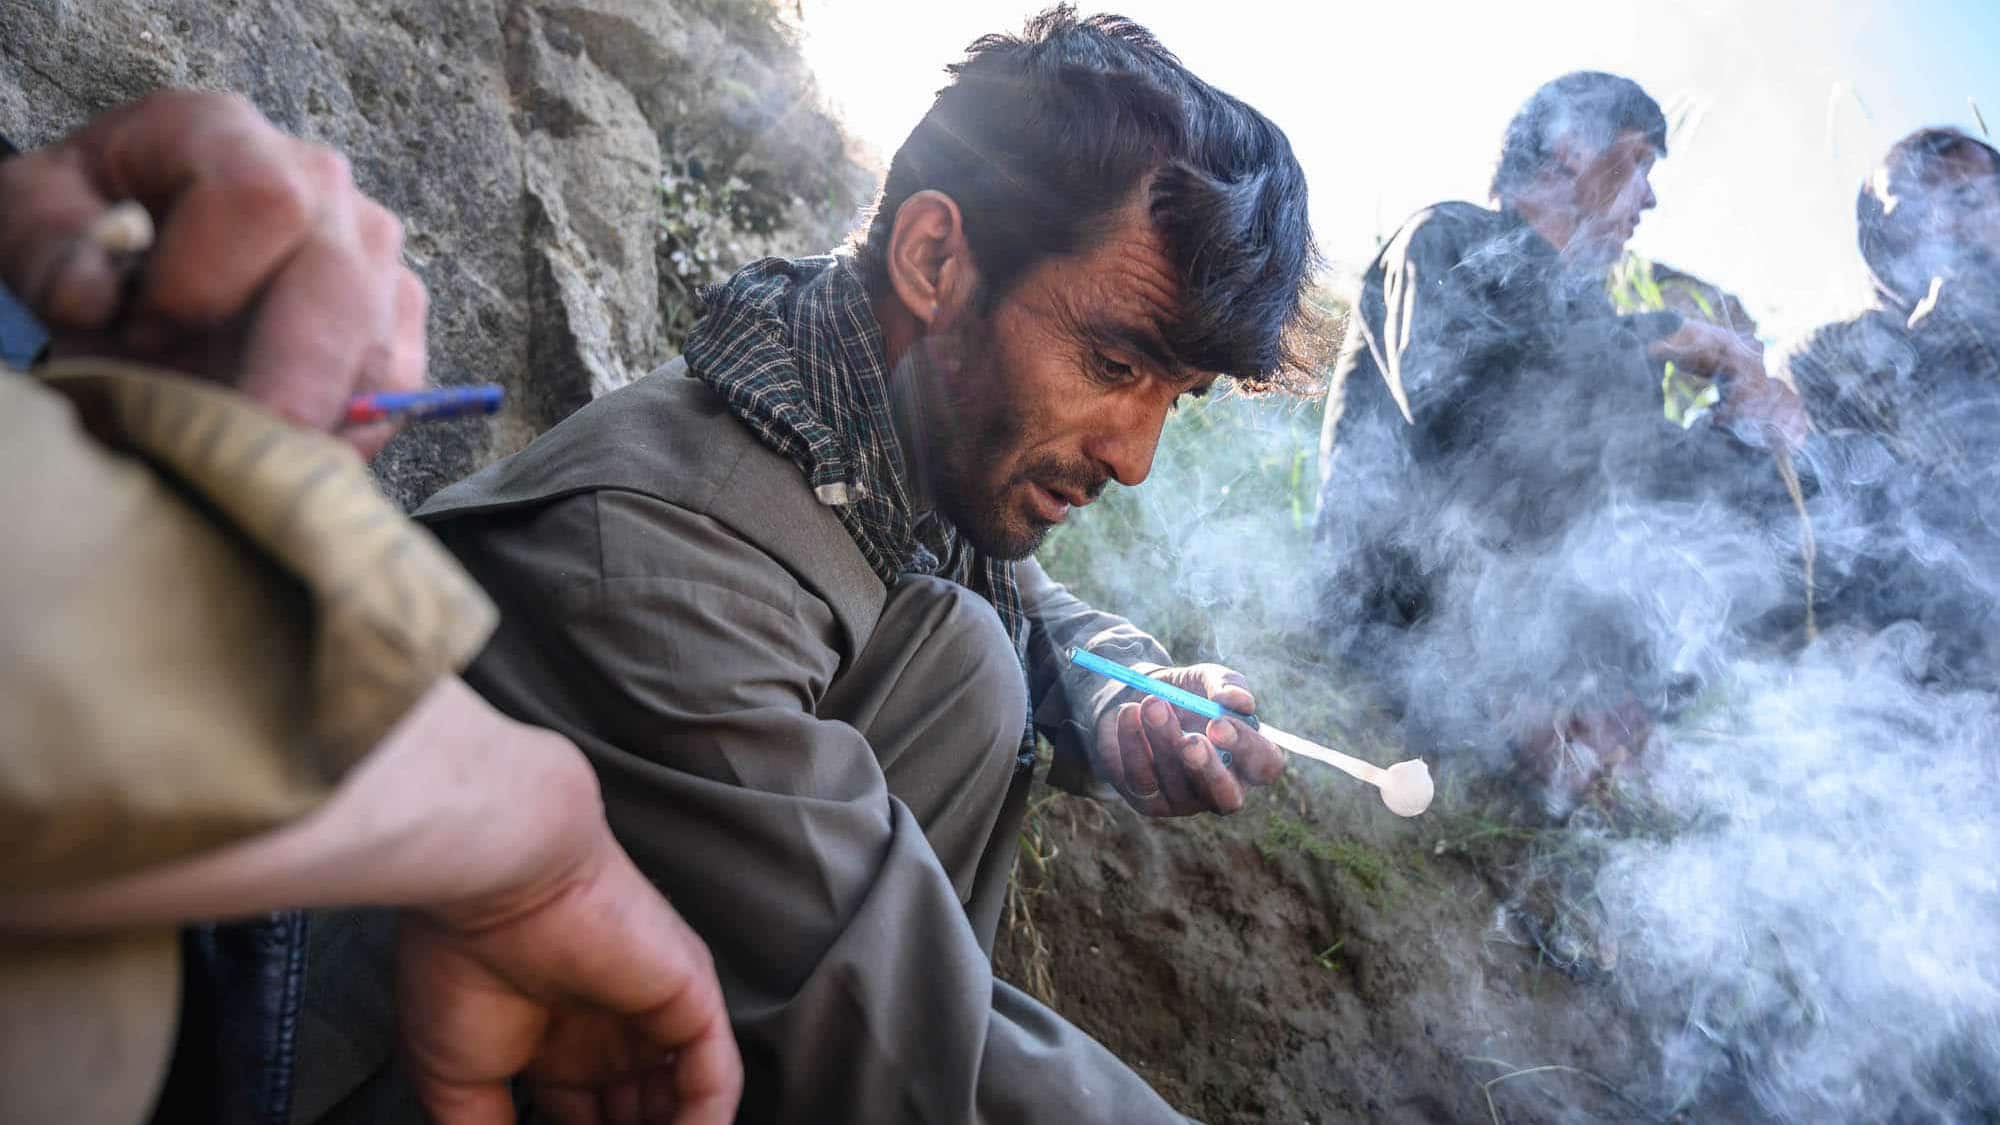 Afghanistan’s cities — and even its impoverished rural areas — are seeing a flood of crystal meth use and addiction.